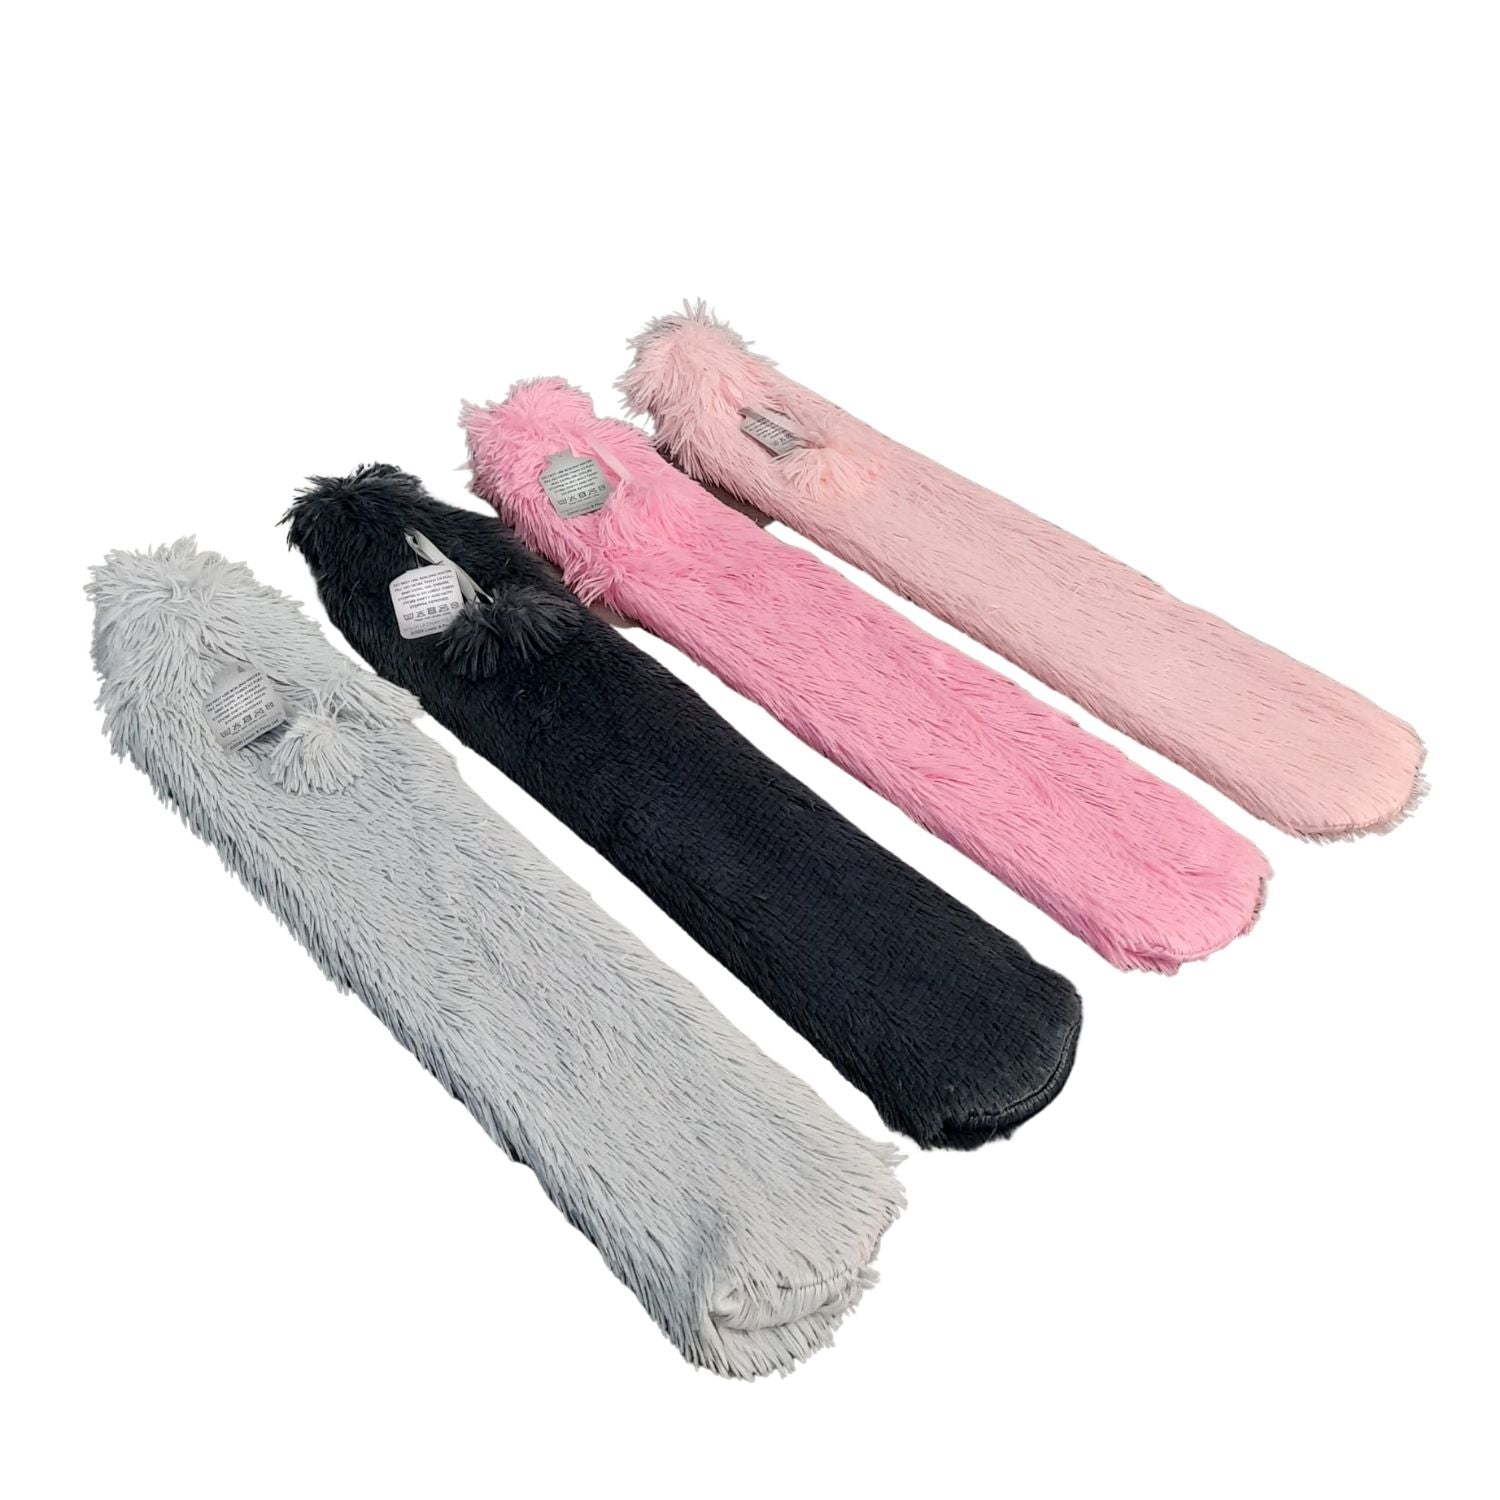 The Home Bedroom Cosy Long Hot Water Bottle - Blush 3 Shaws Department Stores